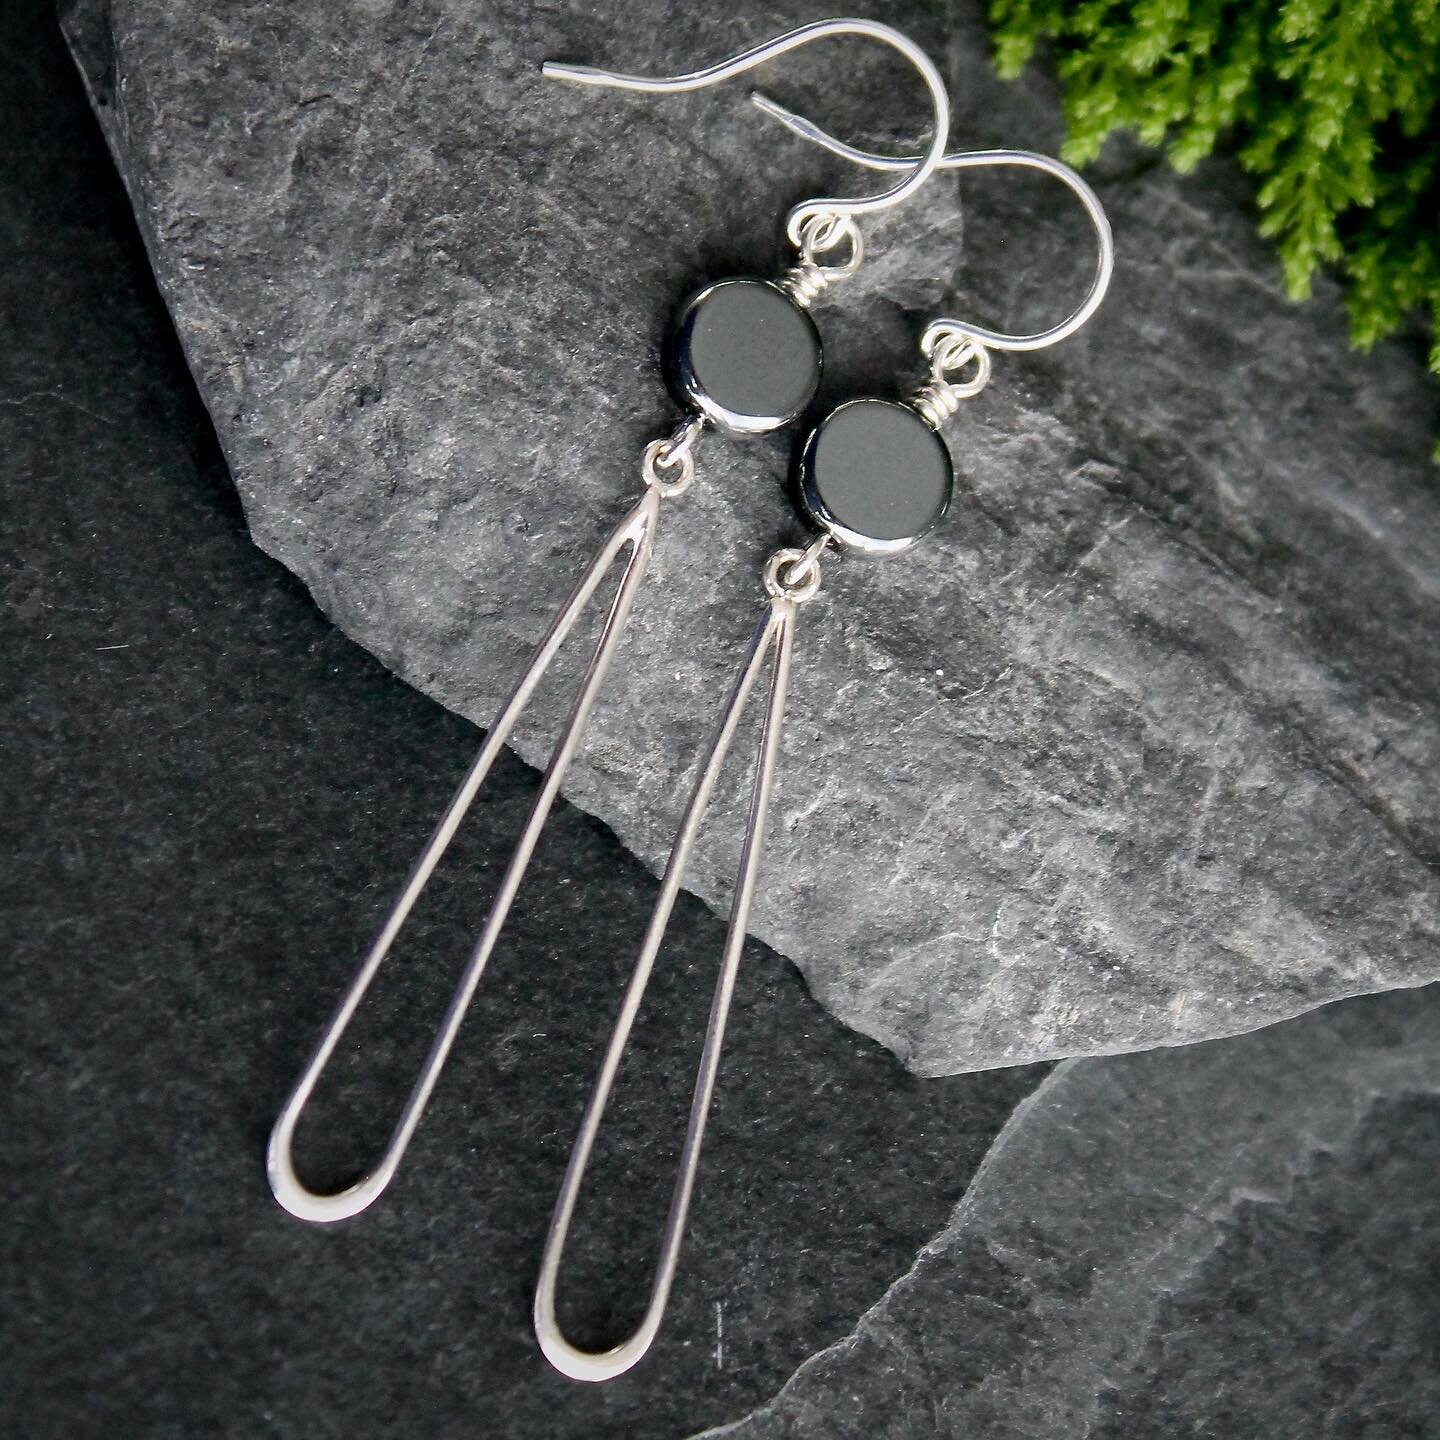 A C A D I A

The latest in the lineup!

#sterlingsilver #handmadeinvermont #lightweightjewelry #jewelry #earrings #silverearrings #everyday #acadianationalpark